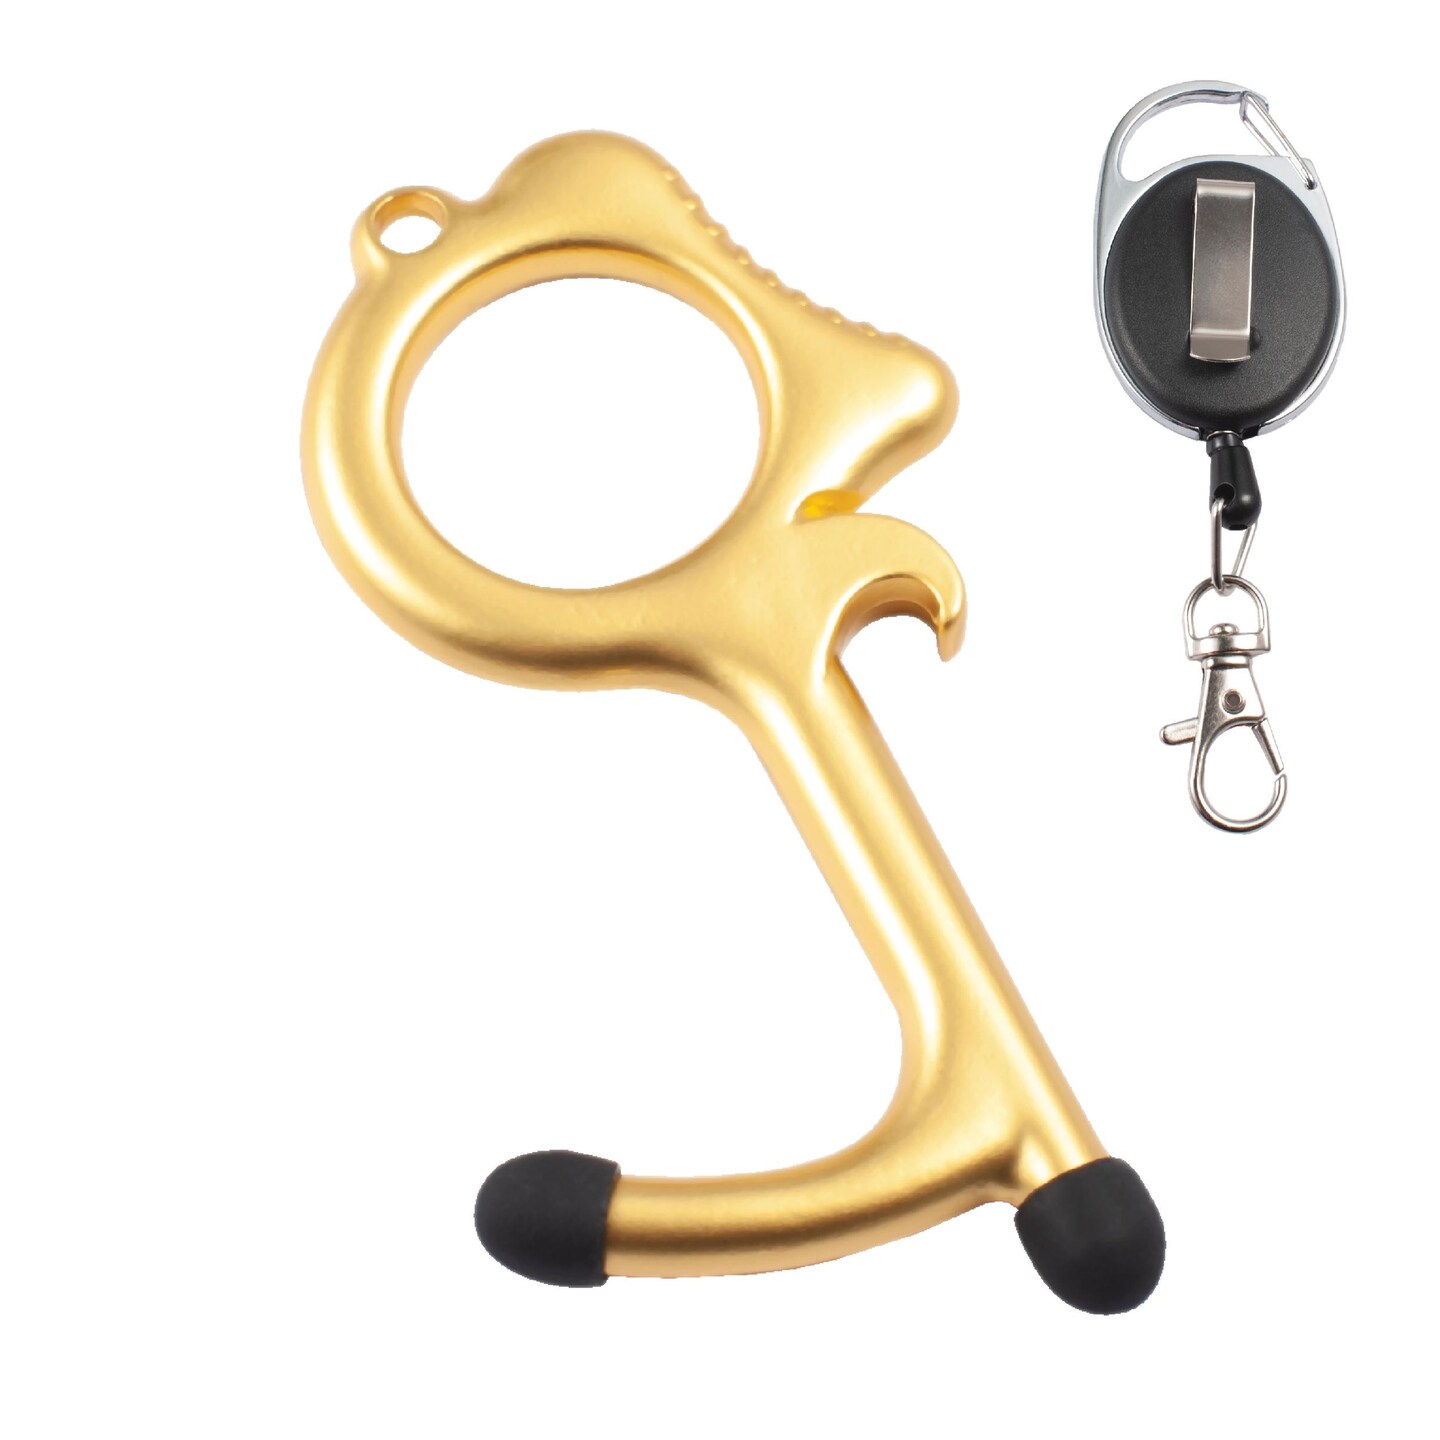 Zodaca Door Opener, 2 Stylus Ends Touchless Clean Key, Retractable Keychain Included (Gold)